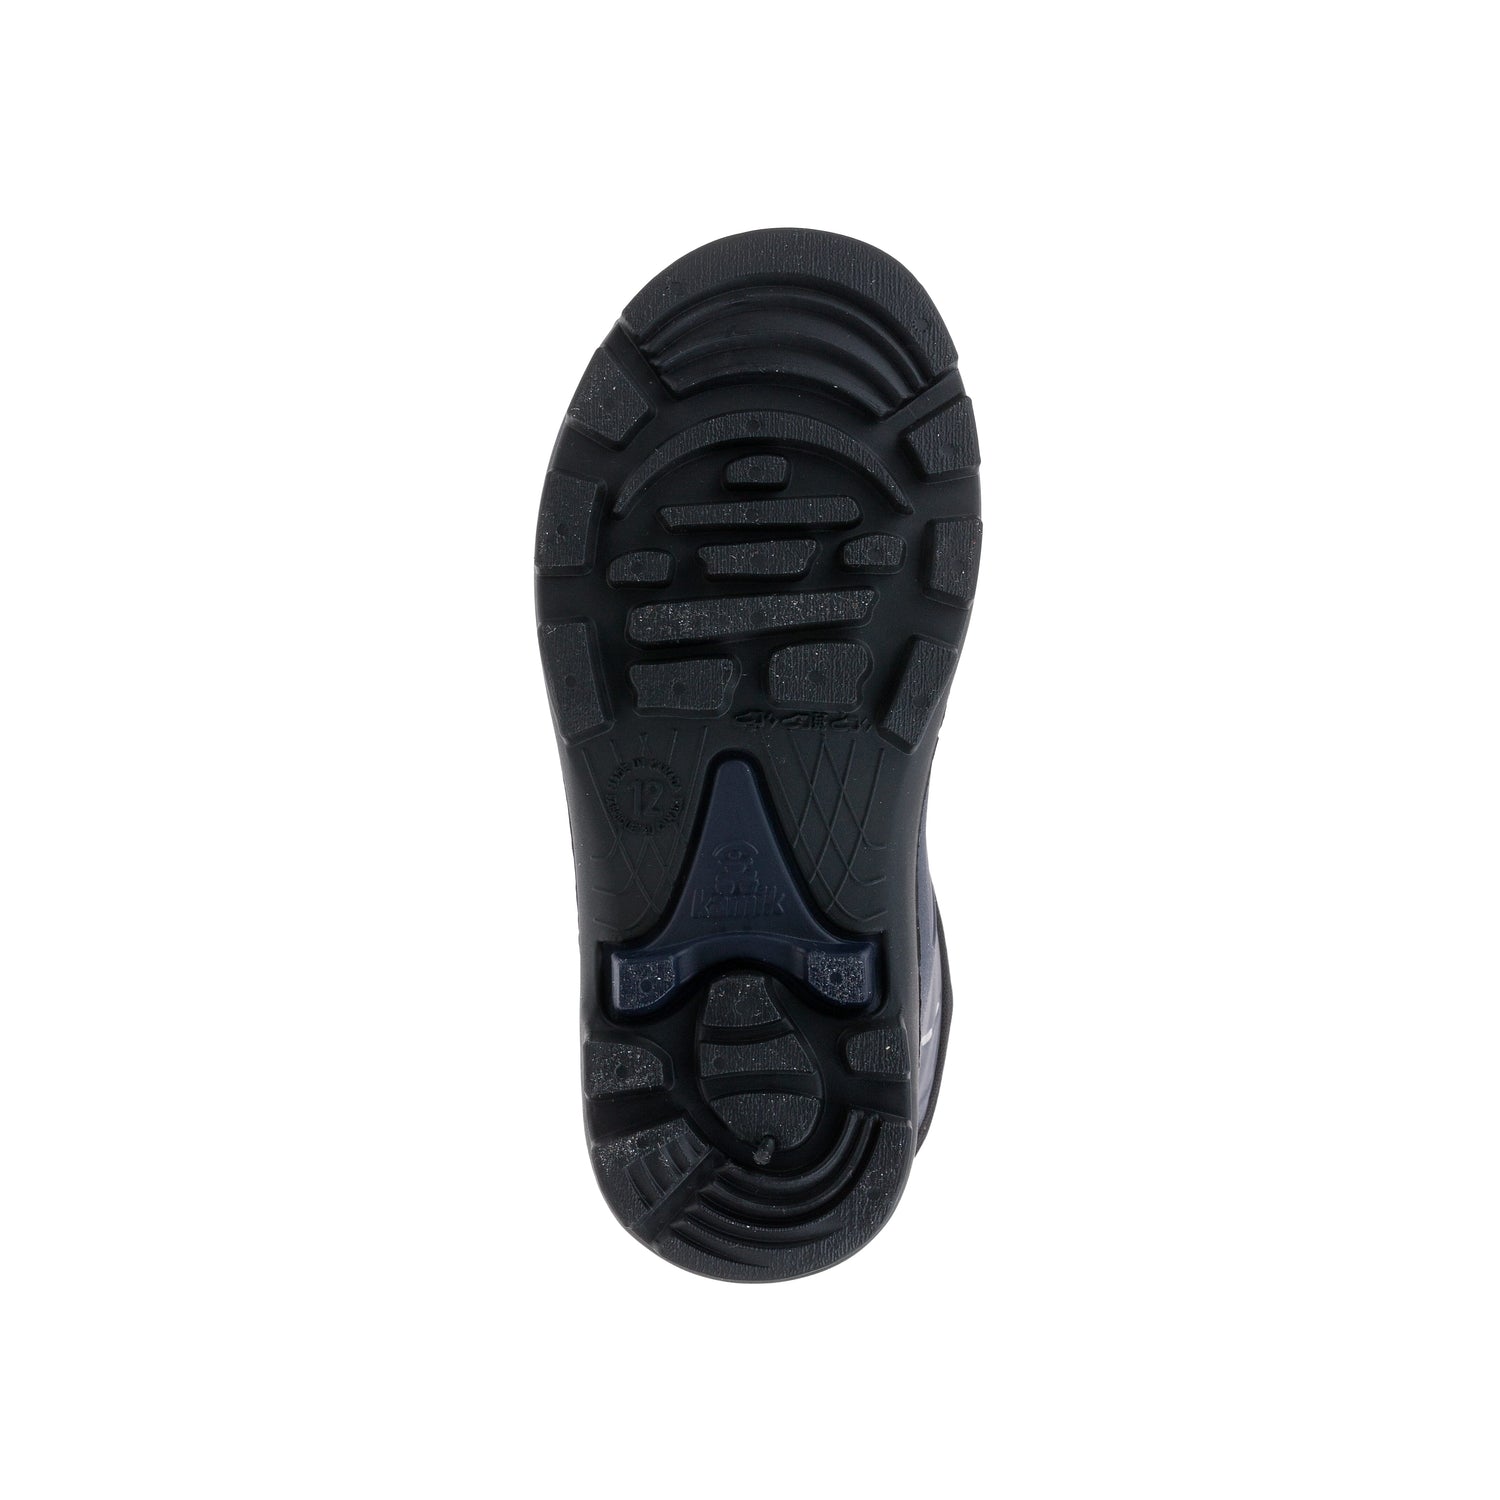 NAVY : SNOBUSTER 1 Sole View